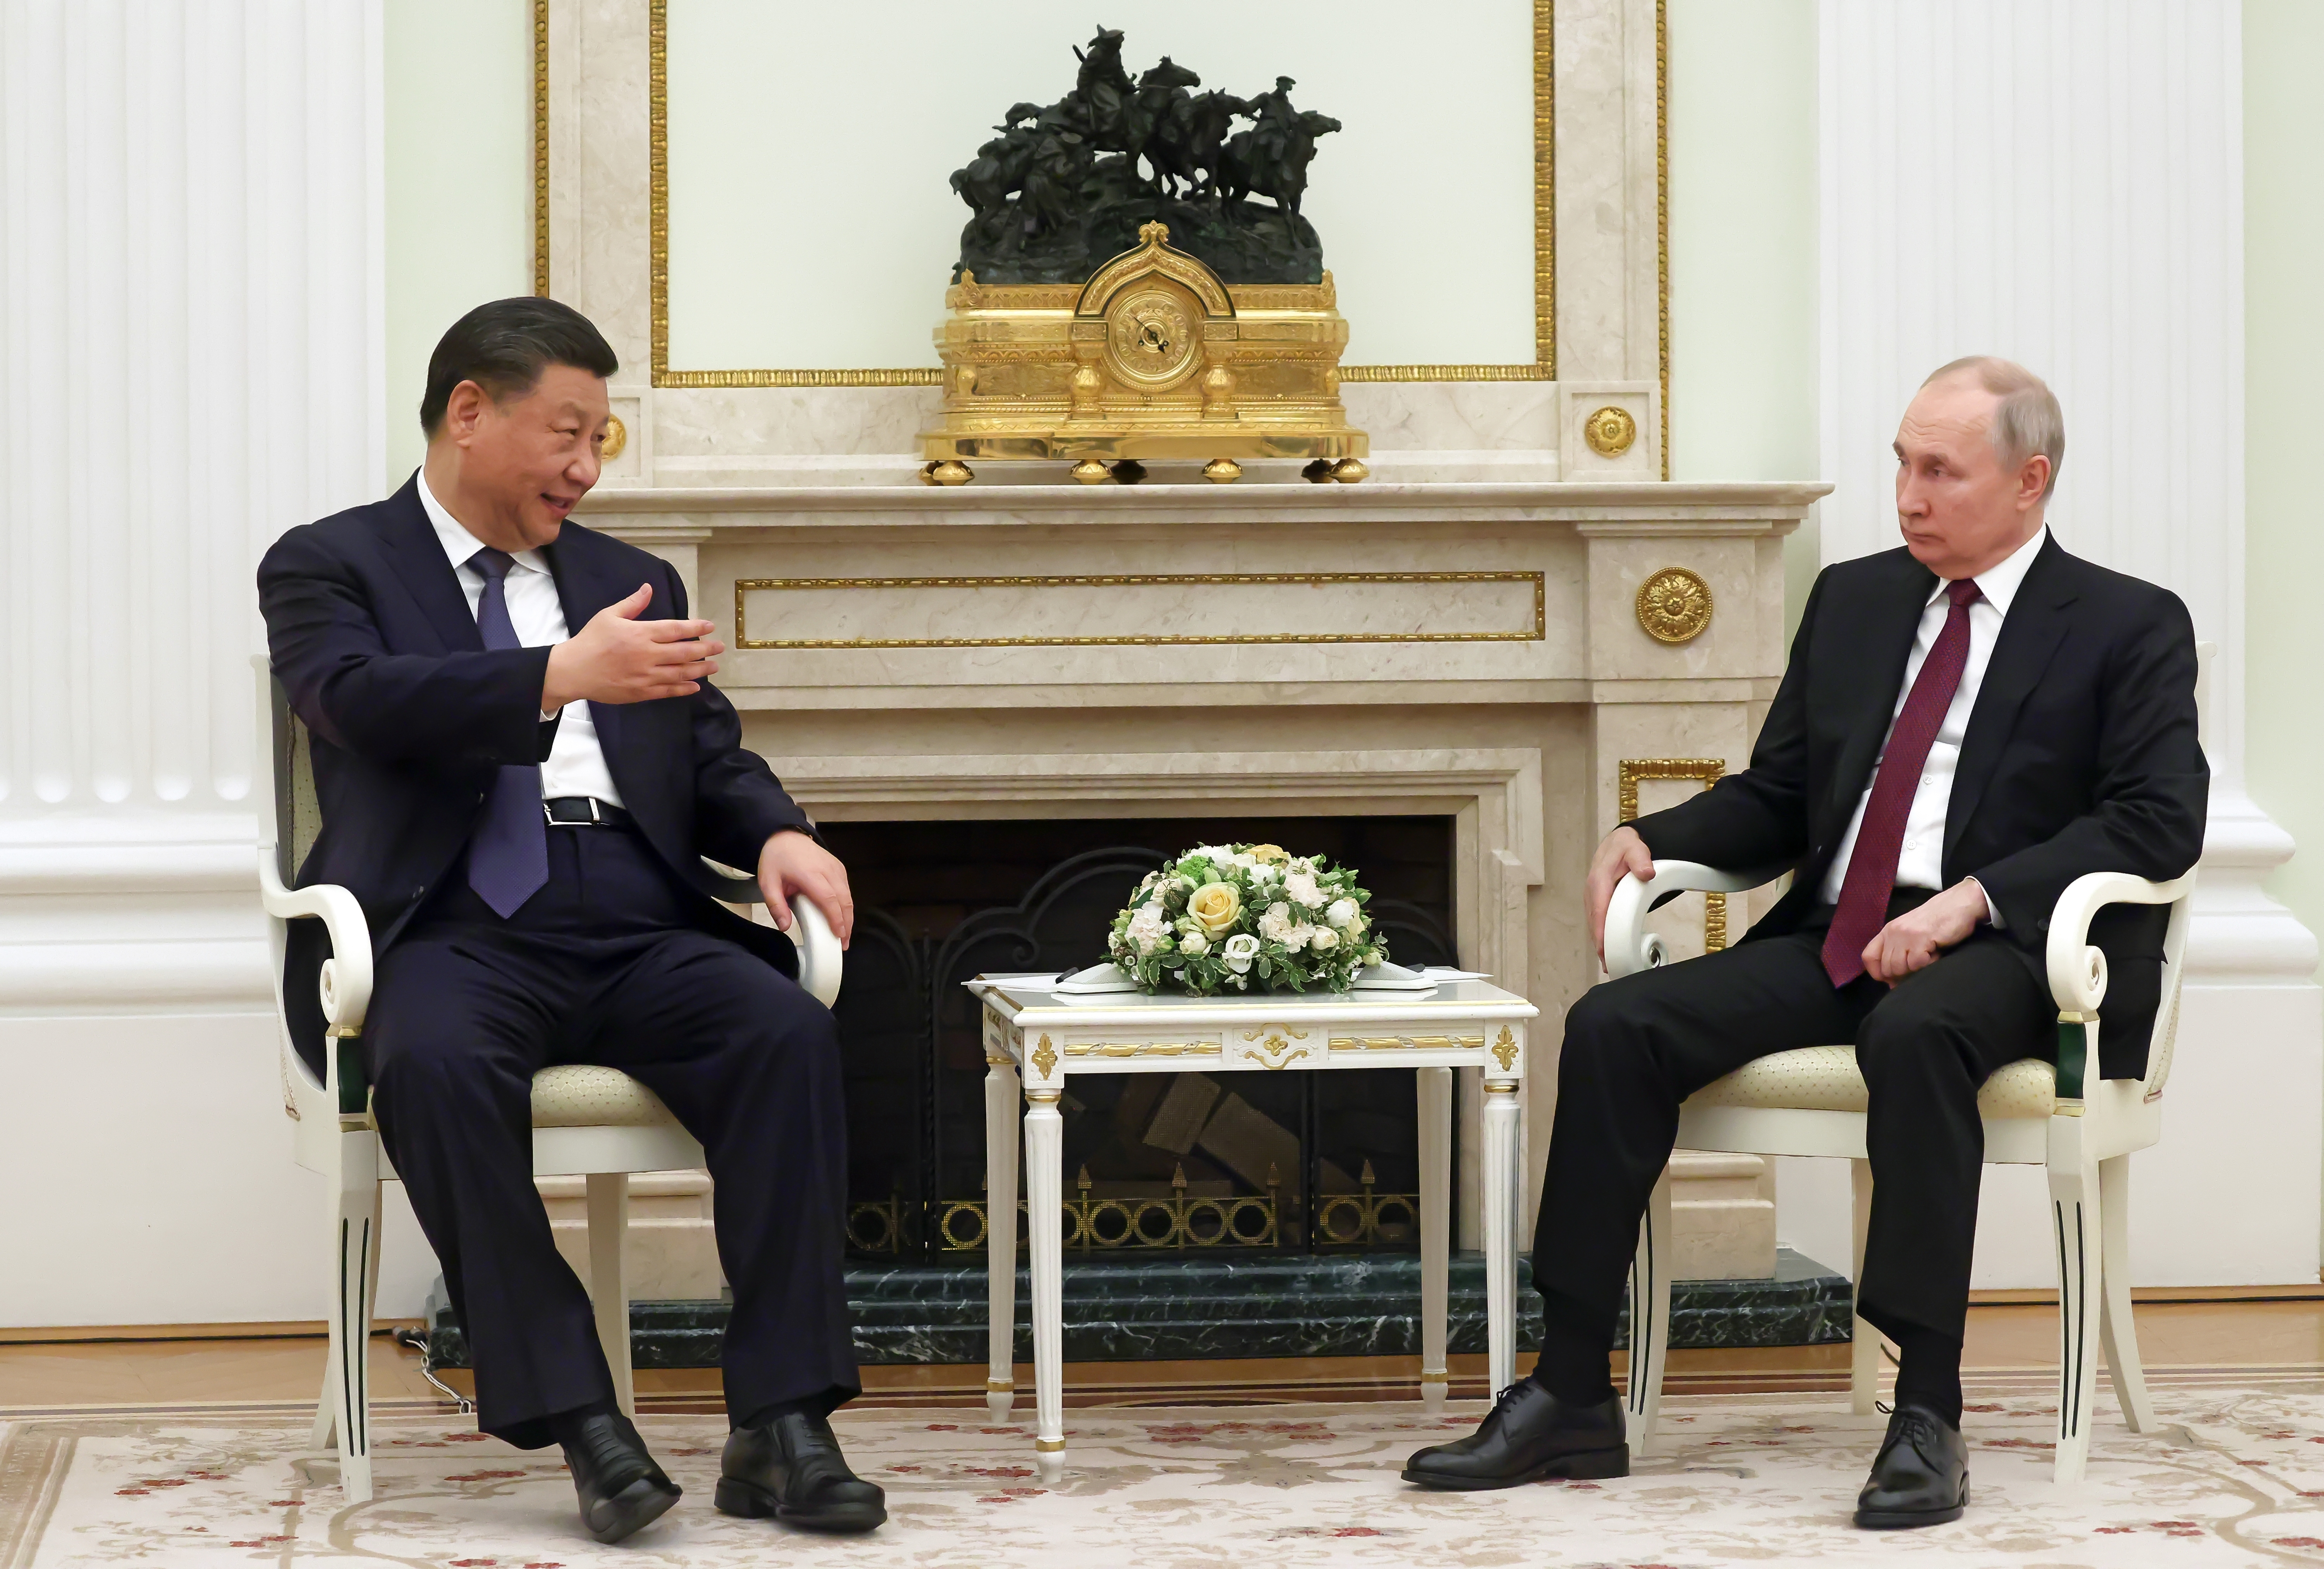 Russia, China united against U.S. but not in everything else